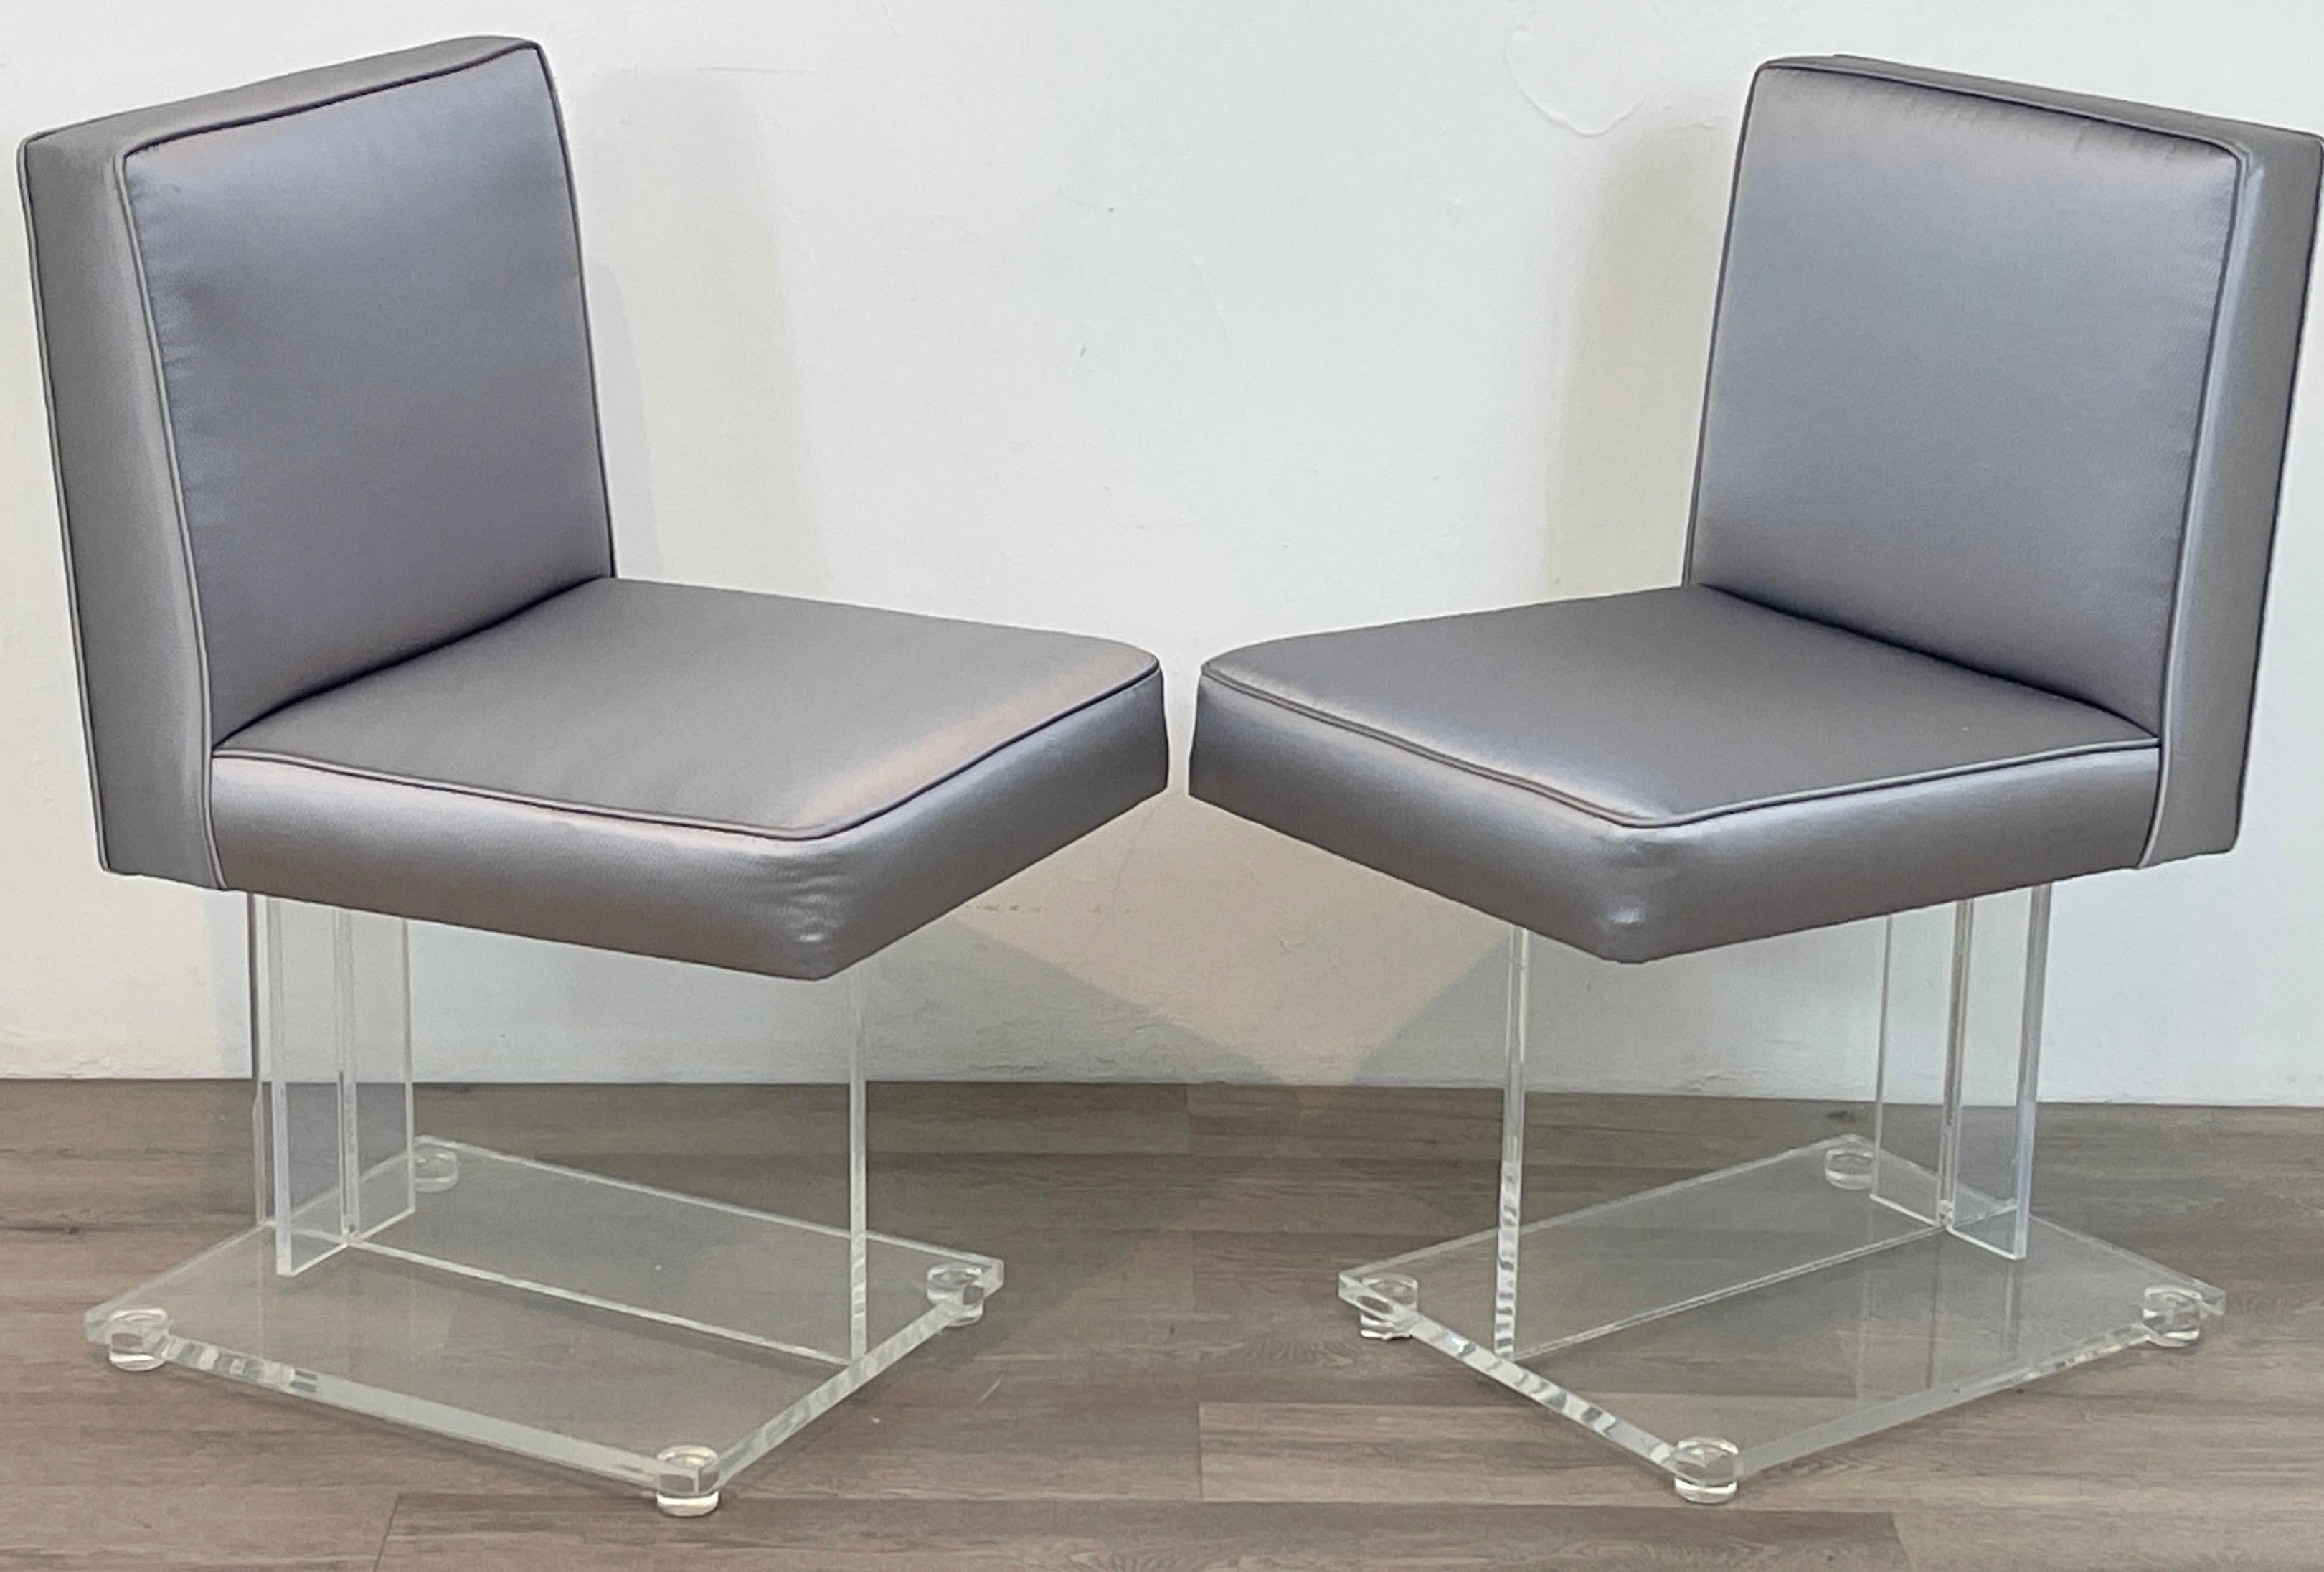 Pair of 1970s Diminutive Sculptural Lucite Chairs 
Each one with gray upholstered back and seat rest, on a sculptural lucite base. 
The design displays influences of  works by Vladimir Kagan. 
Would make great boudoir/slipper chairs. 
Each chair